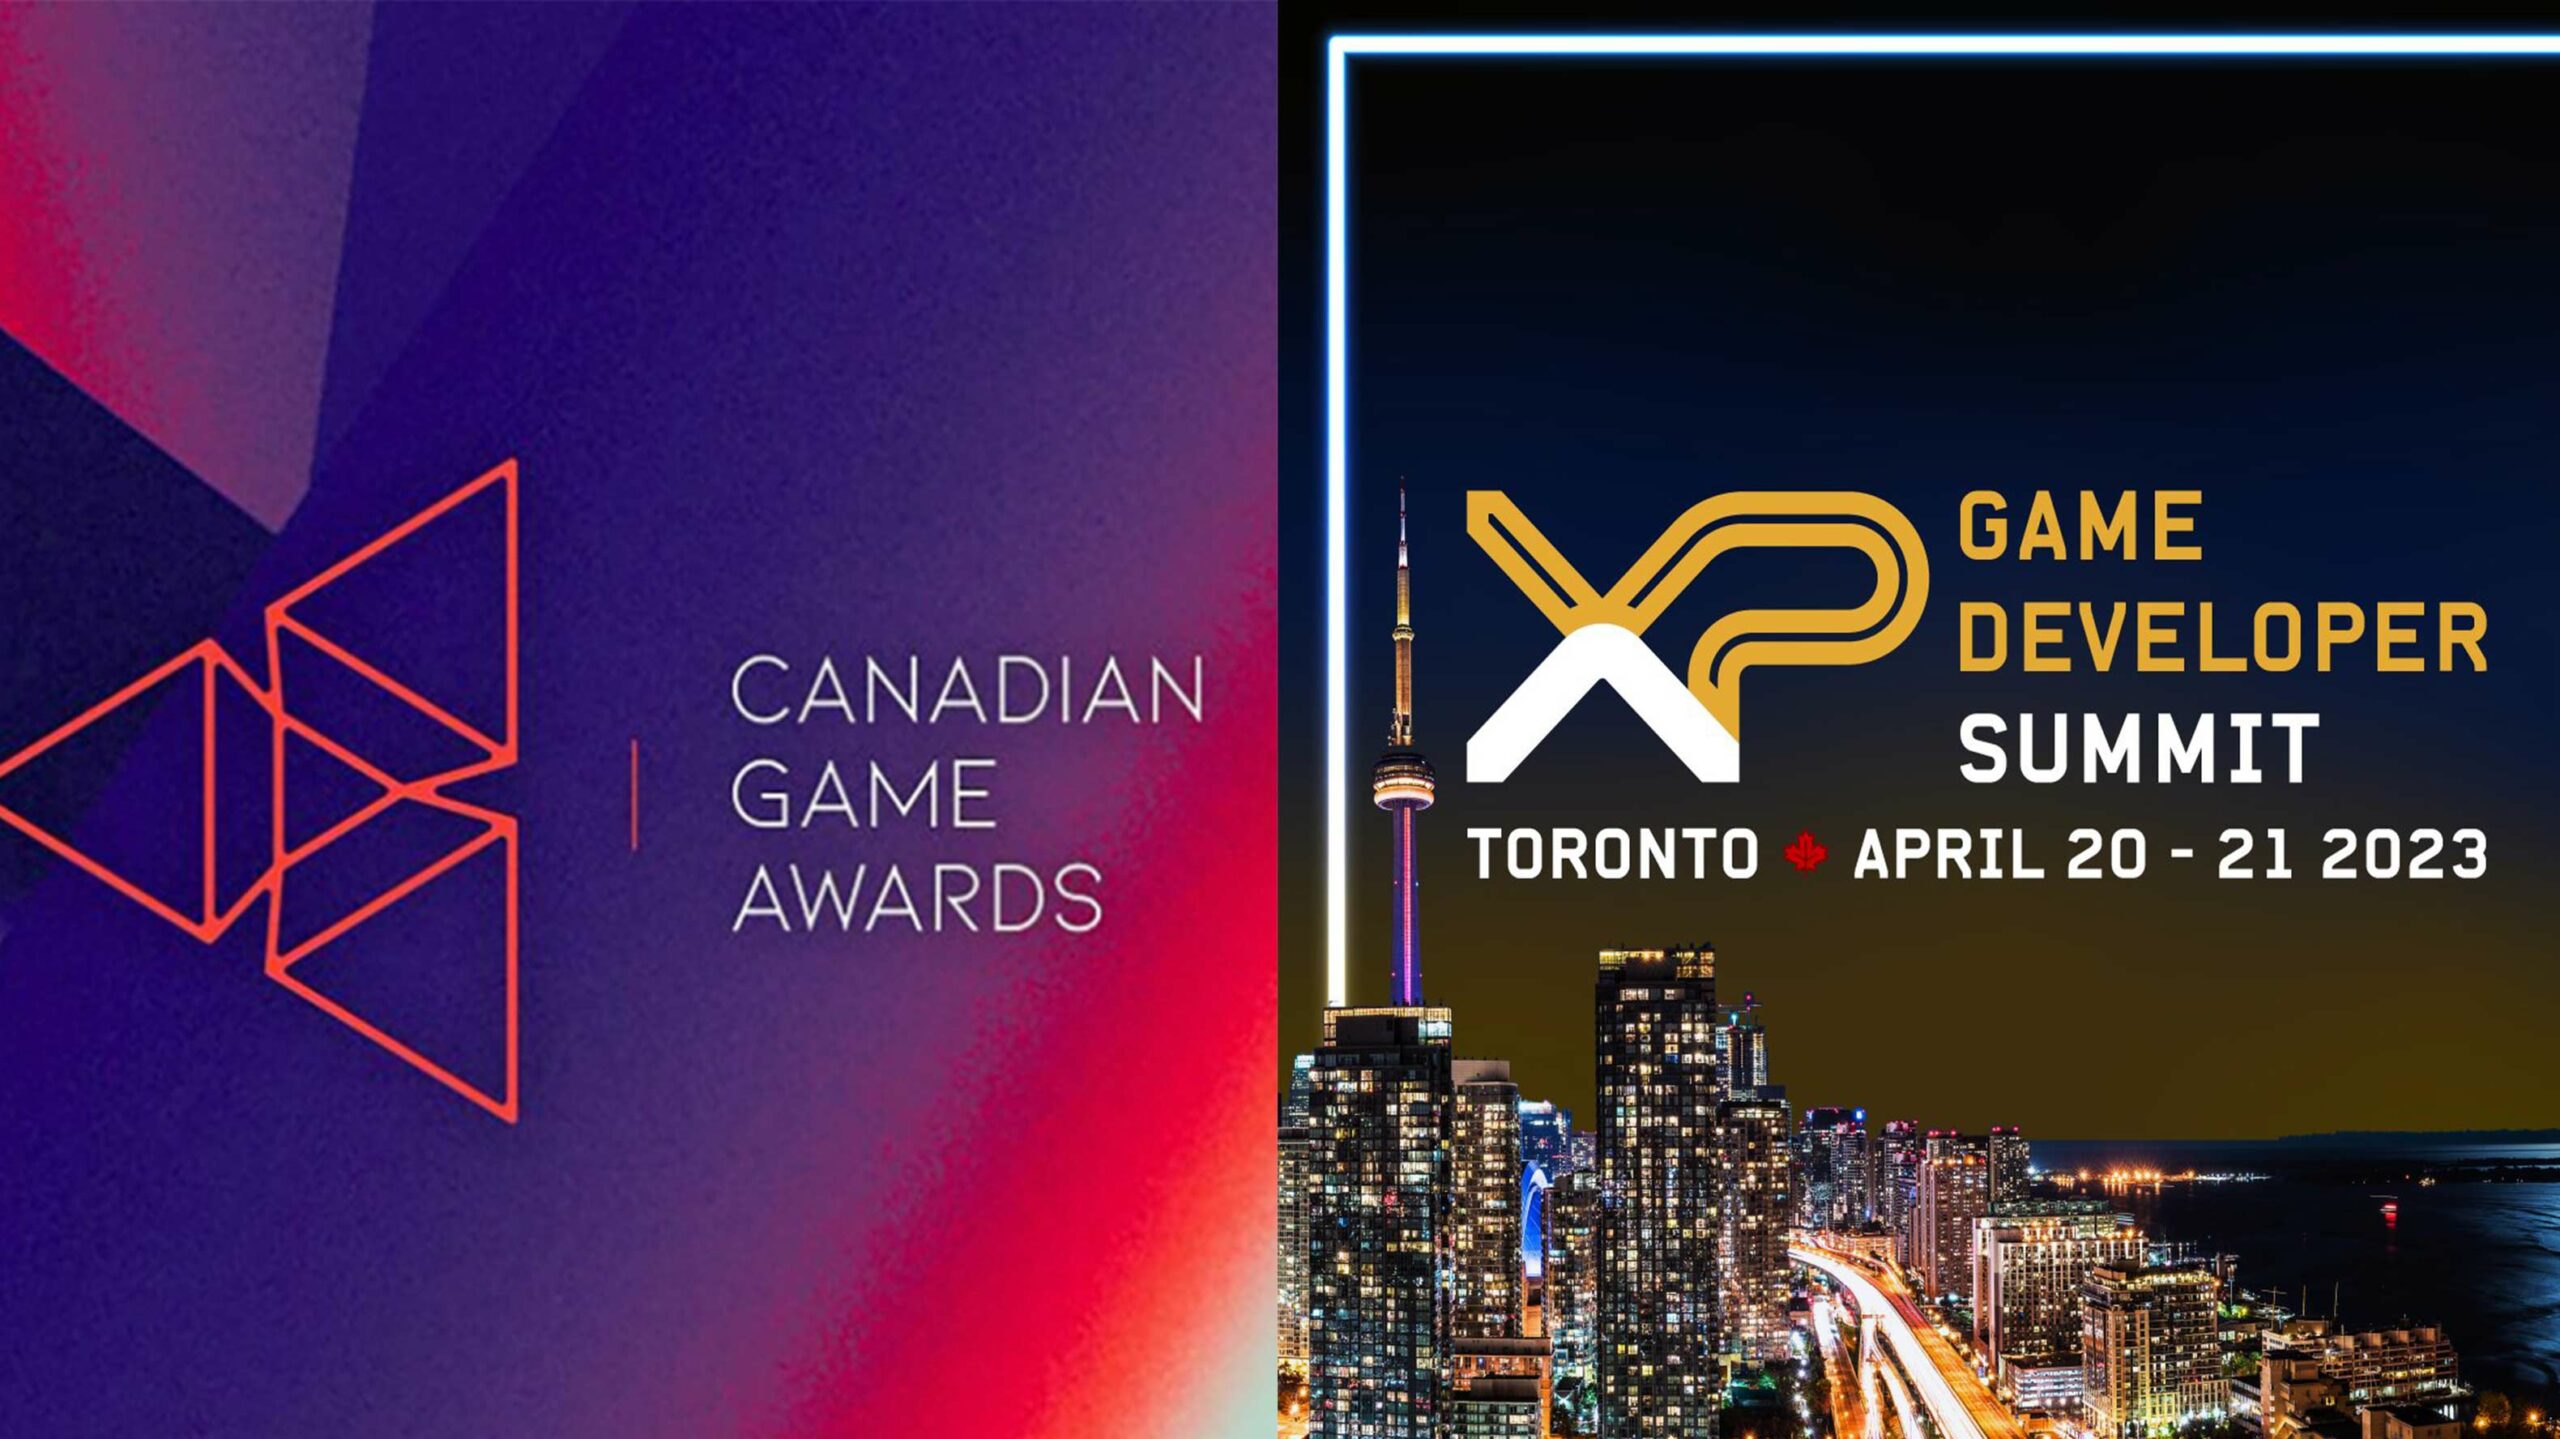 Canadian Game Awards and XP Game Developer Summit